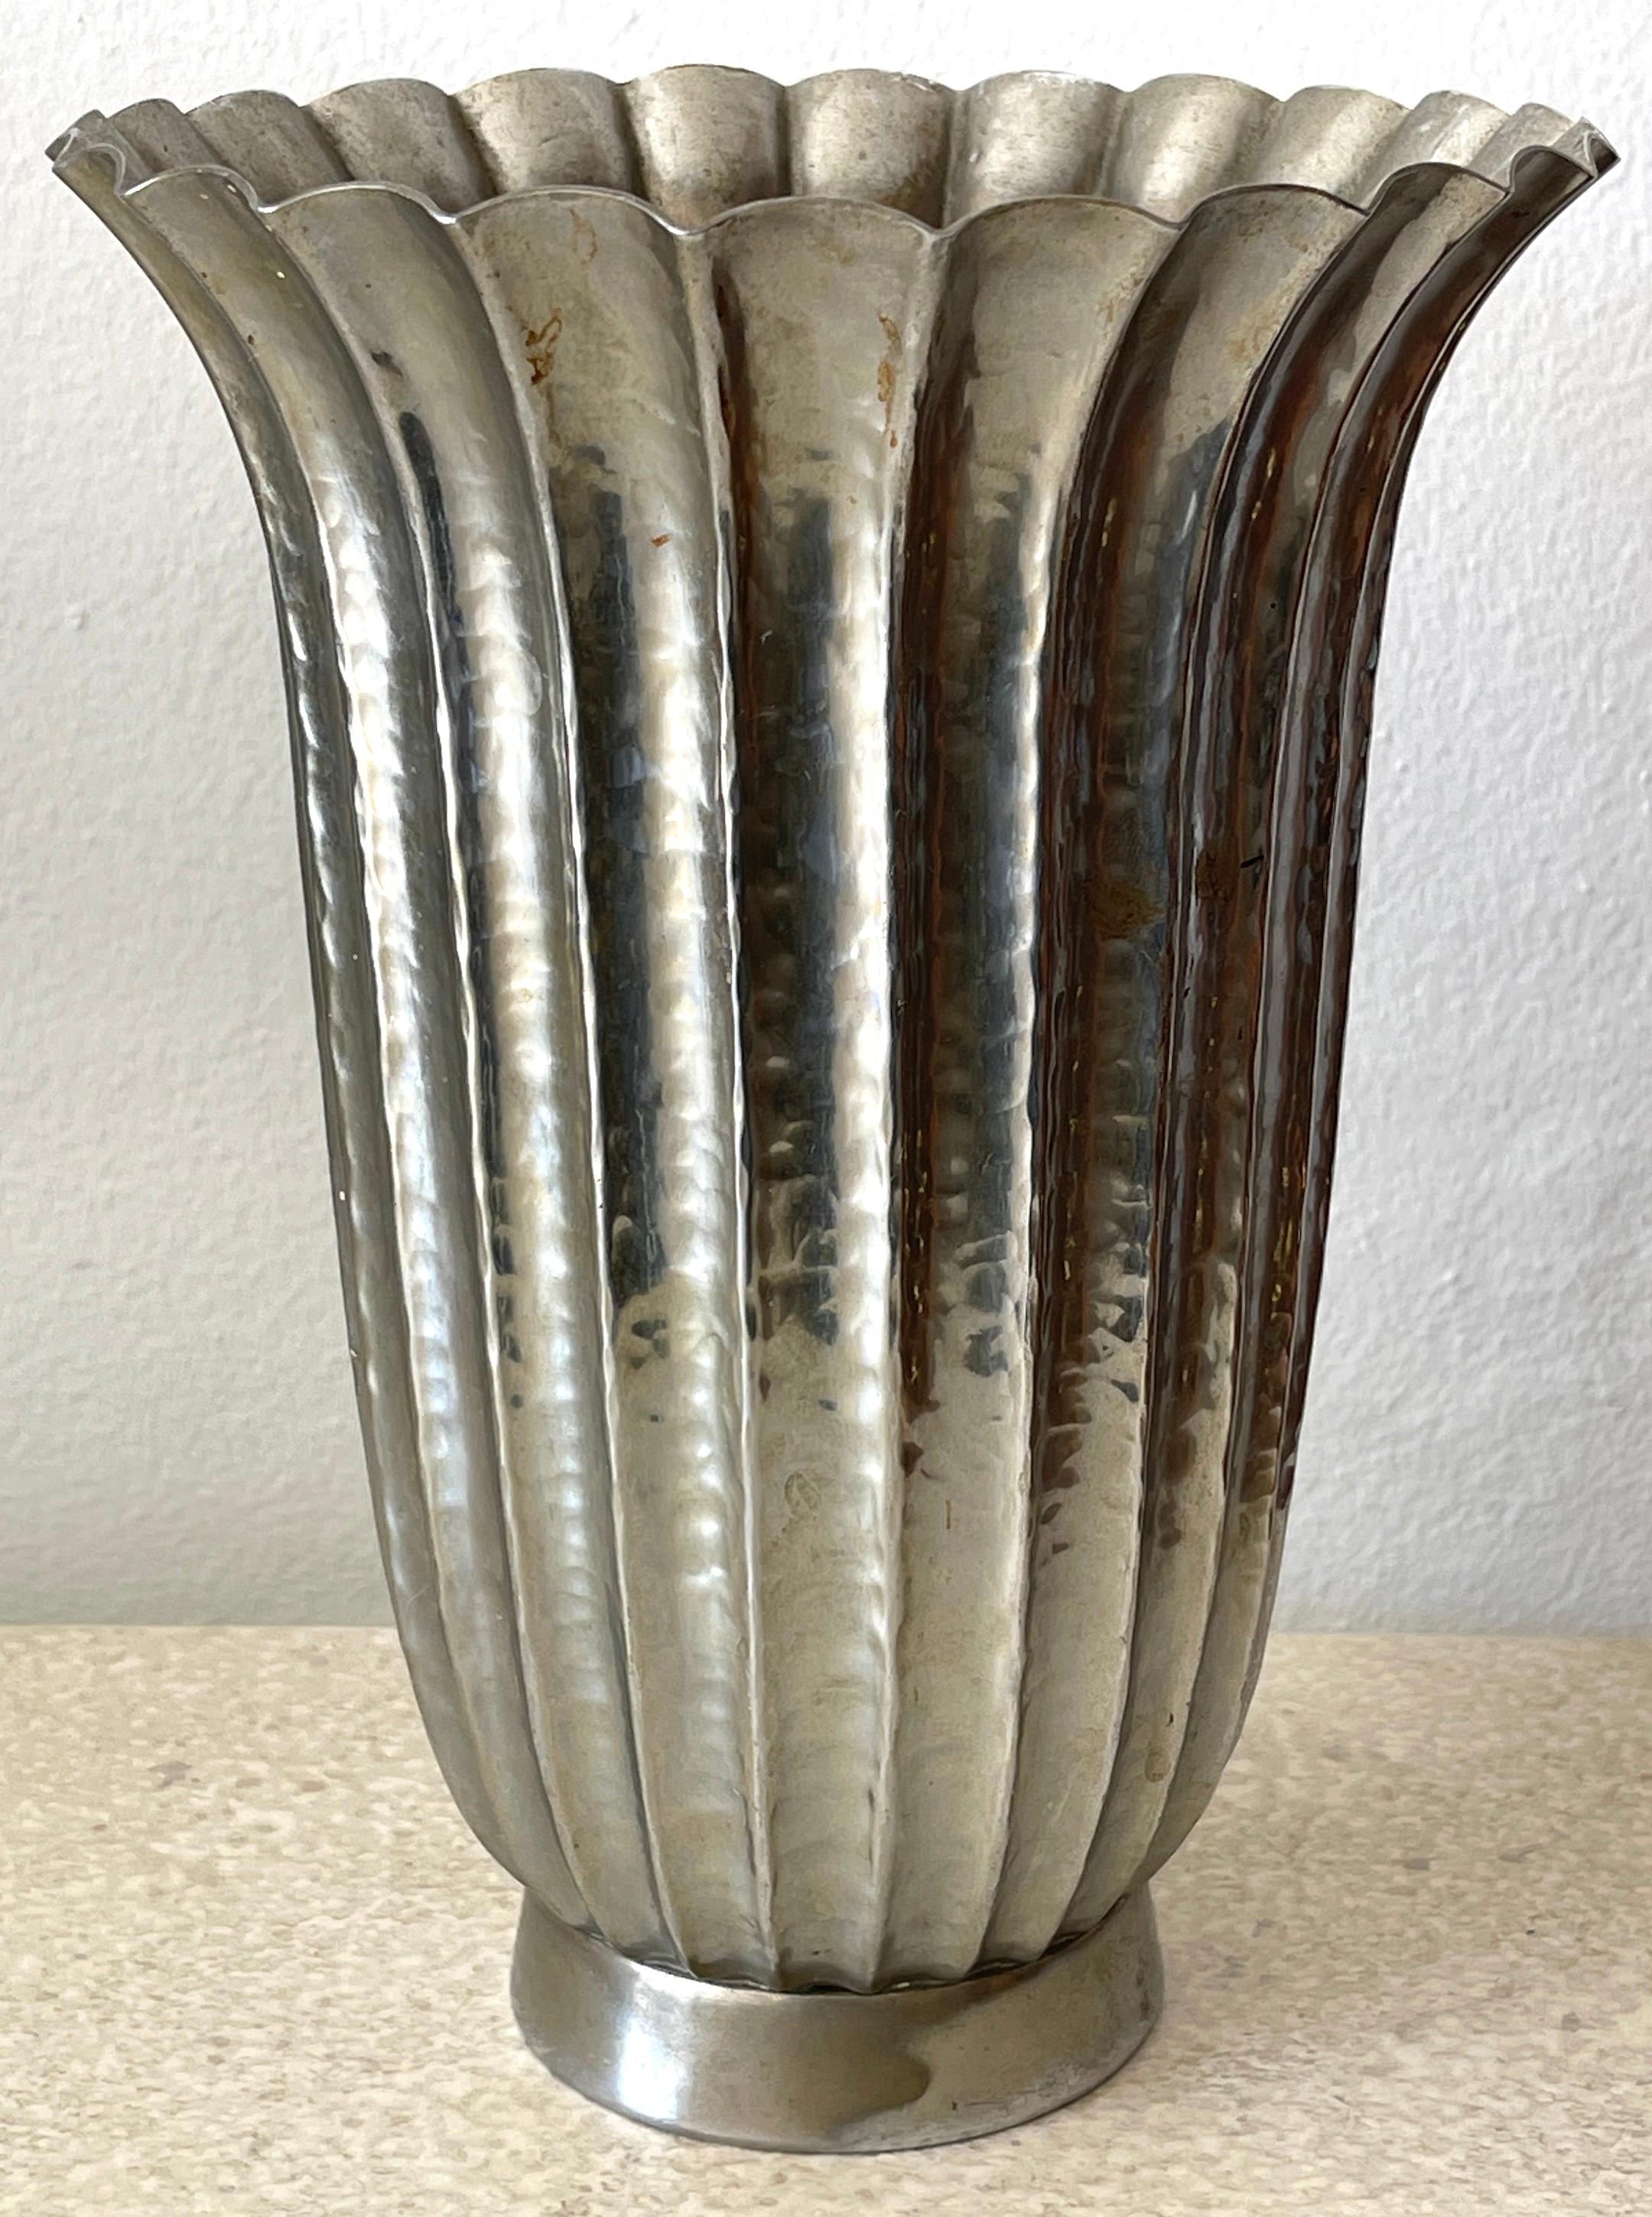 Viennese Secessionist style fluted vase, of typical form with influences of Josef Hoffmann/ Wiener Werkstatte. Nickel over copper, beautiful patina. 
Hallmarked with Standing Bear/ Trademark / Stamped copper. 
The vase stands 10-inches high x 7.5